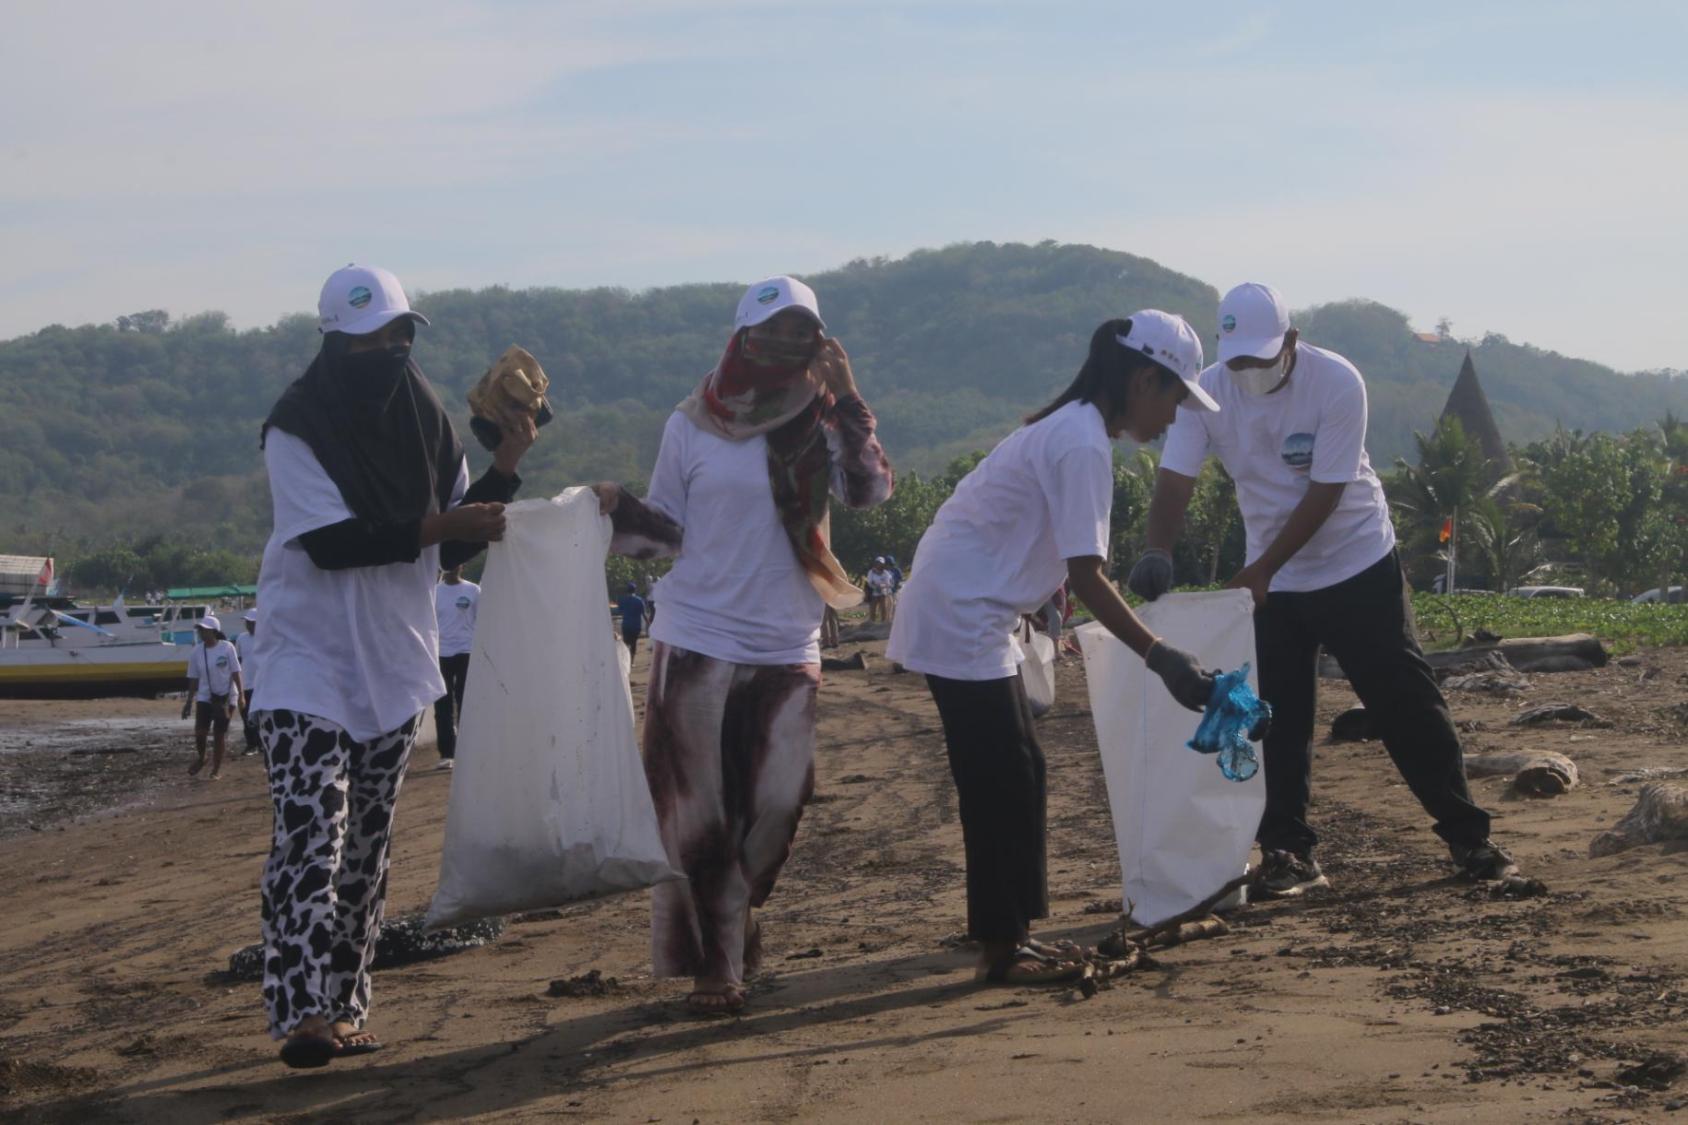 Volunteers wearing white-brimmed hats pick up litter and clean up a beach